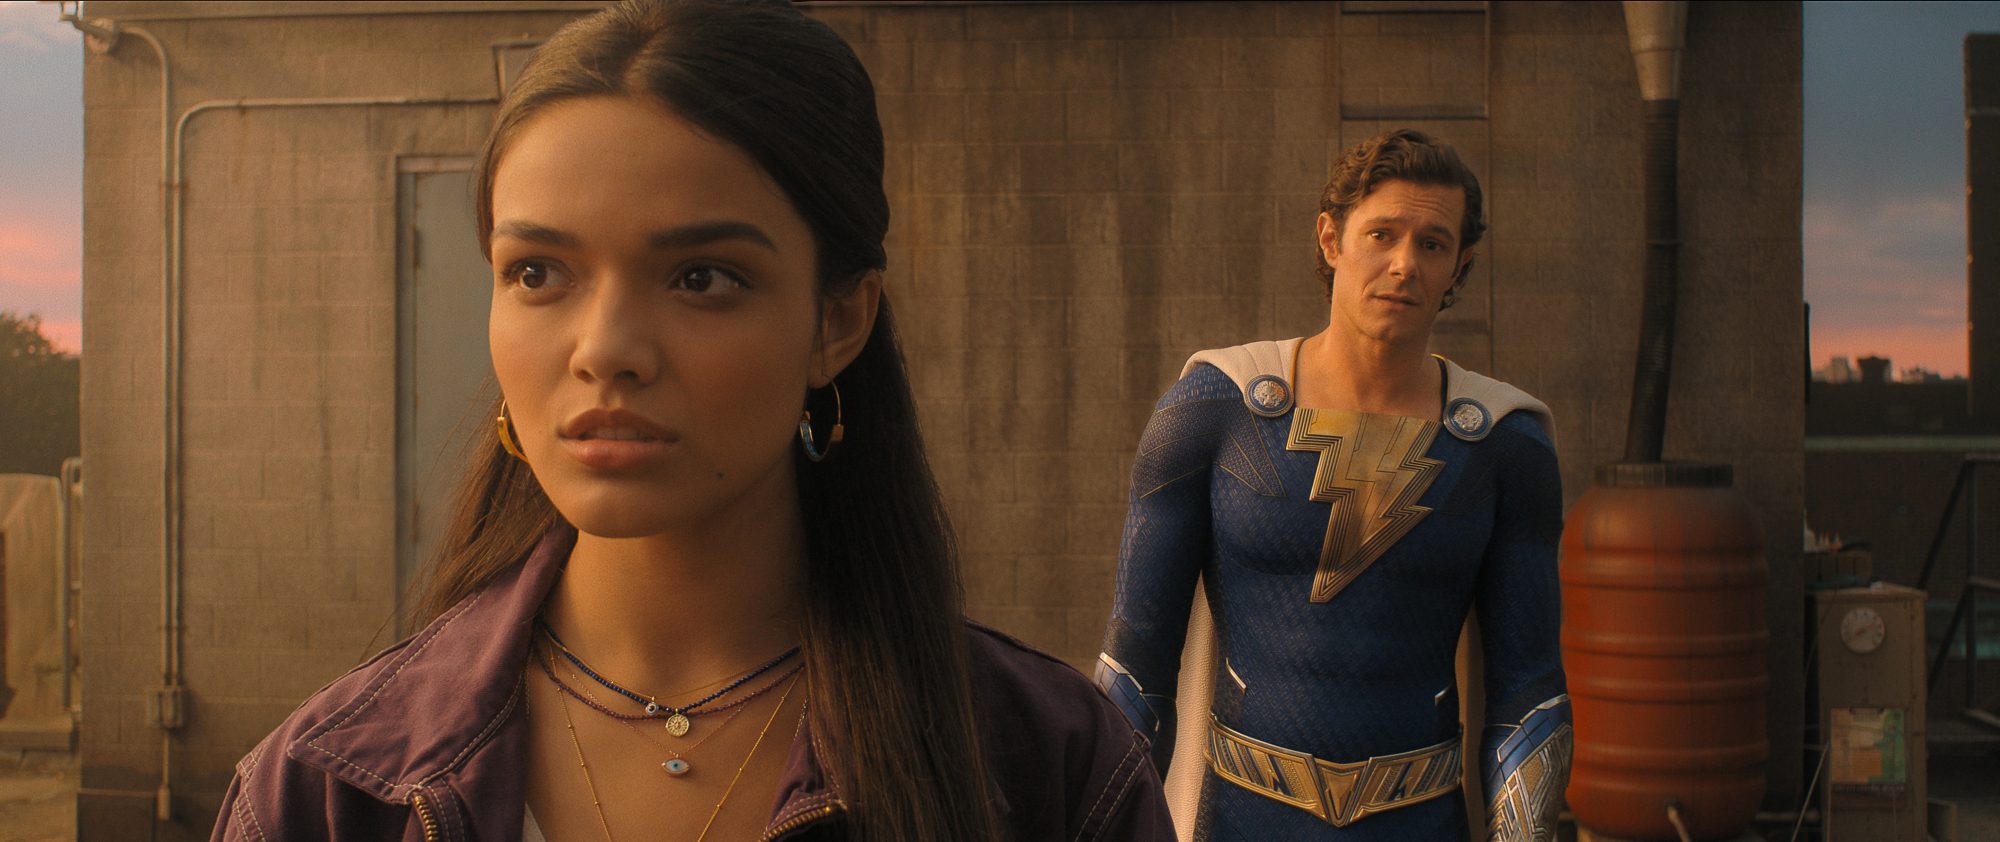 'Shazam! Fury of the Gods' Rachel Zegler as Anthea and Adam Brody as Super Hero Freddy. Zegler is facing the camera and Brody is standing behind her looking at her.